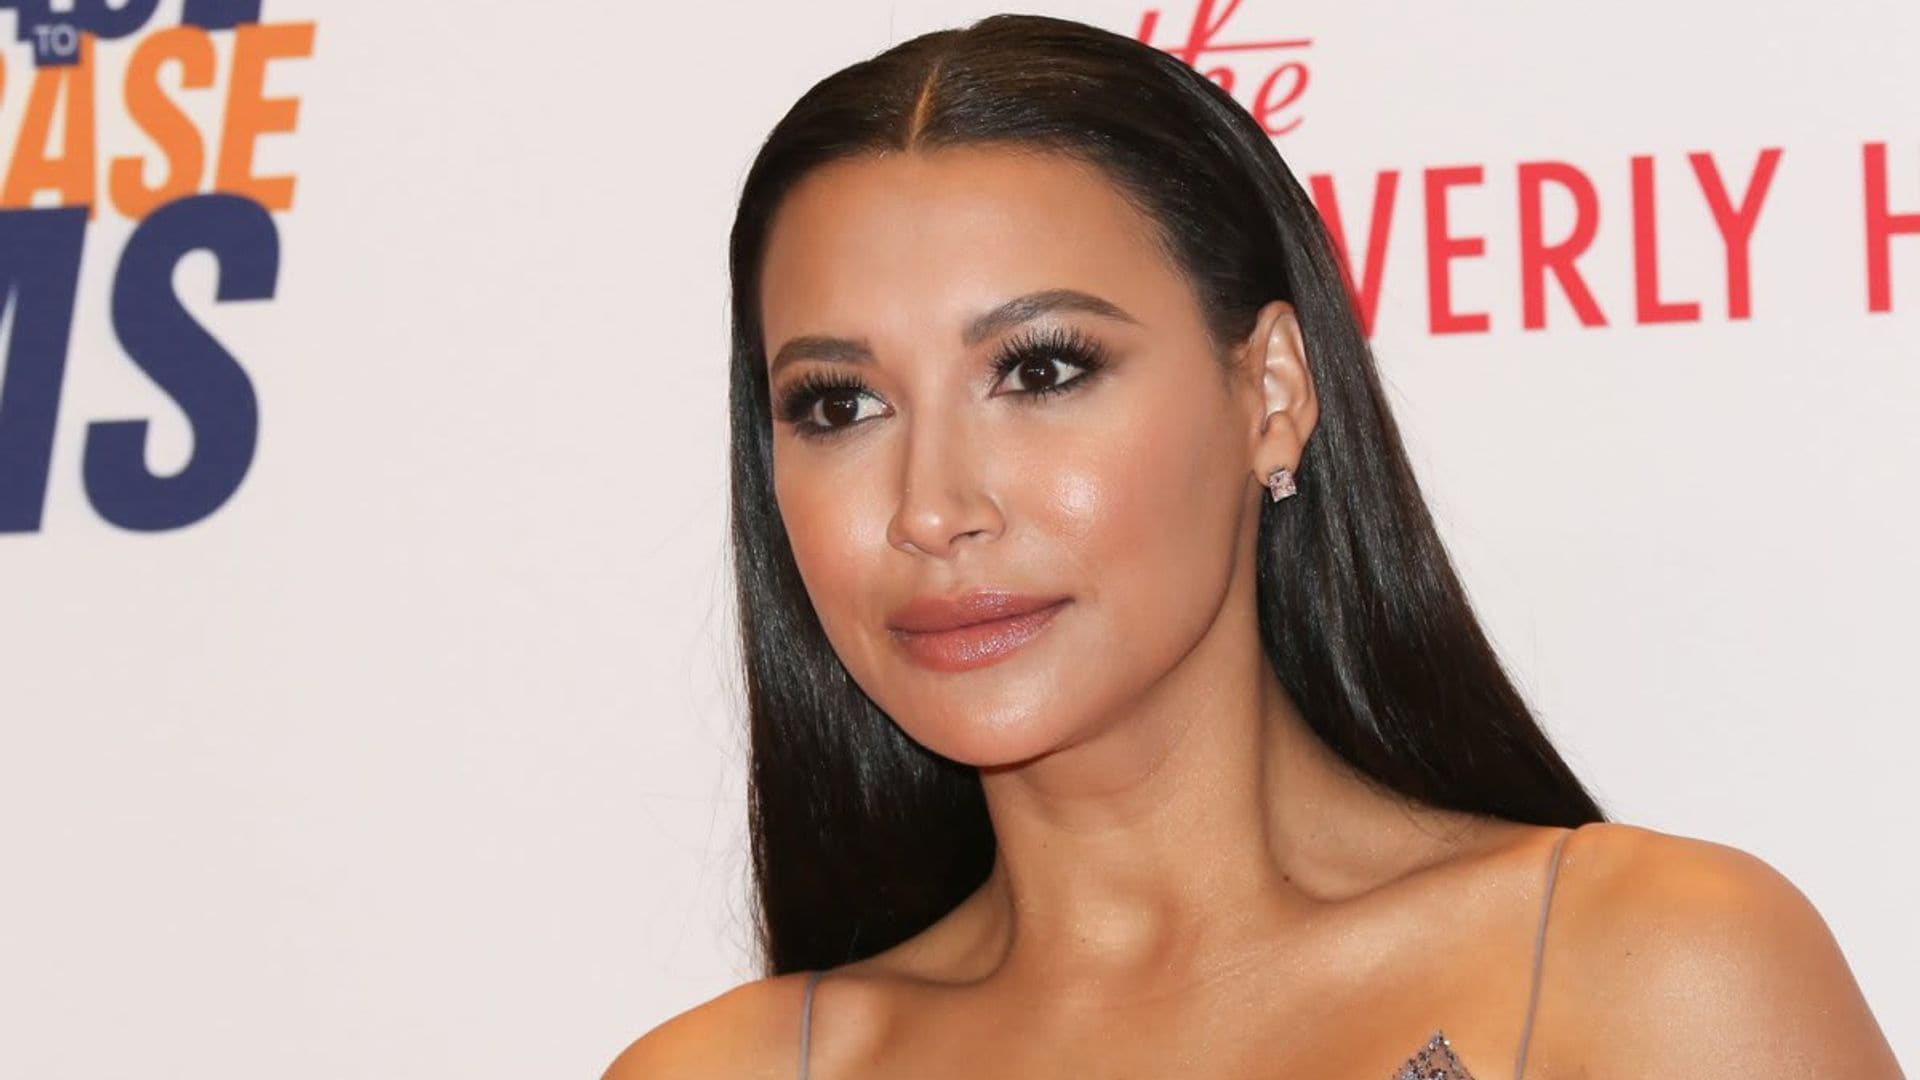 Naya Rivera’s fans mourn but celebrate her life on her birthday